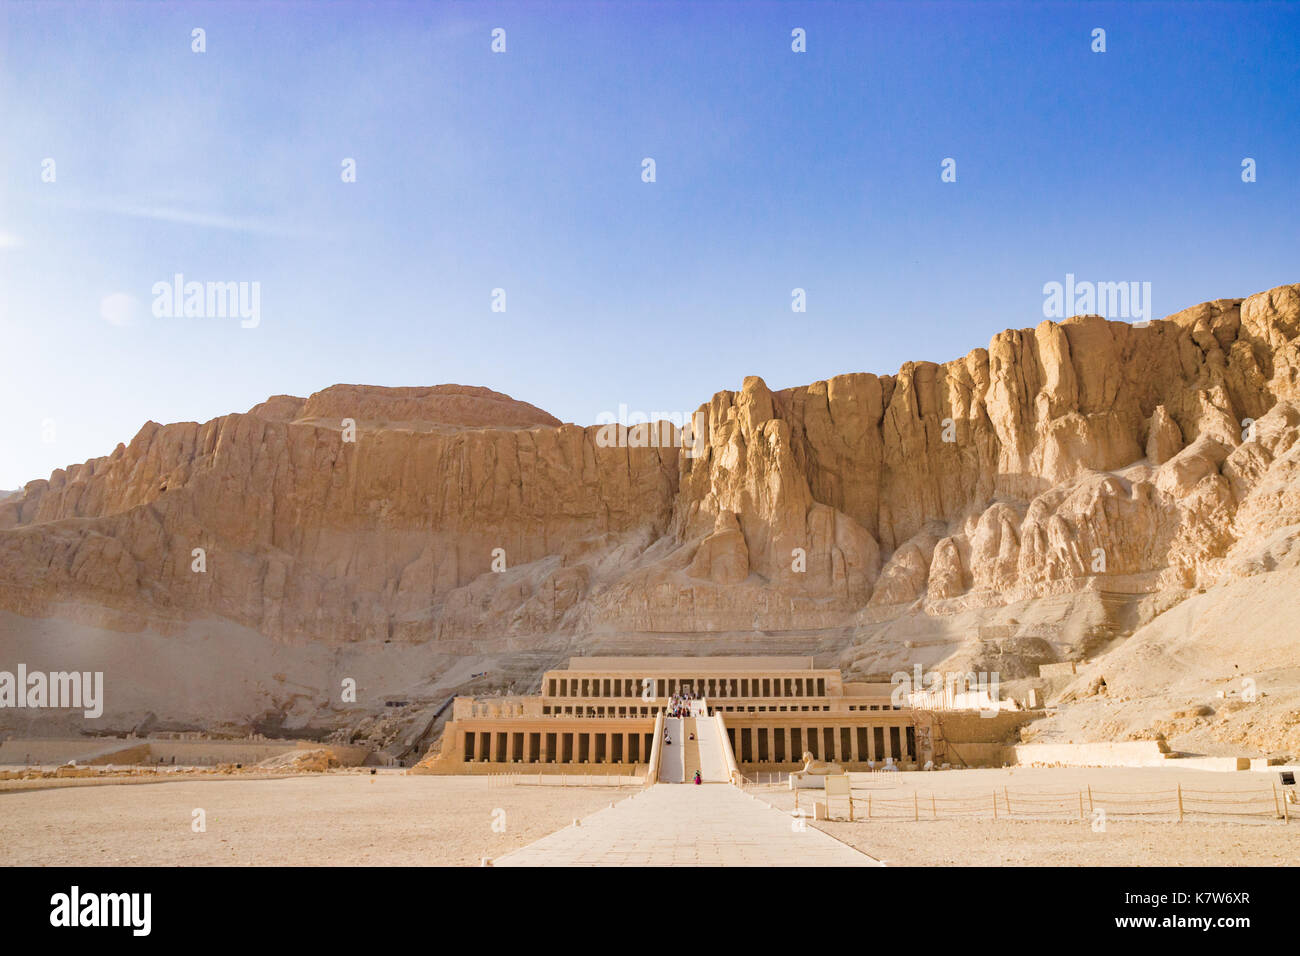 The ancient temple of Hatshepsut in Luxor, Egypt Stock Photo